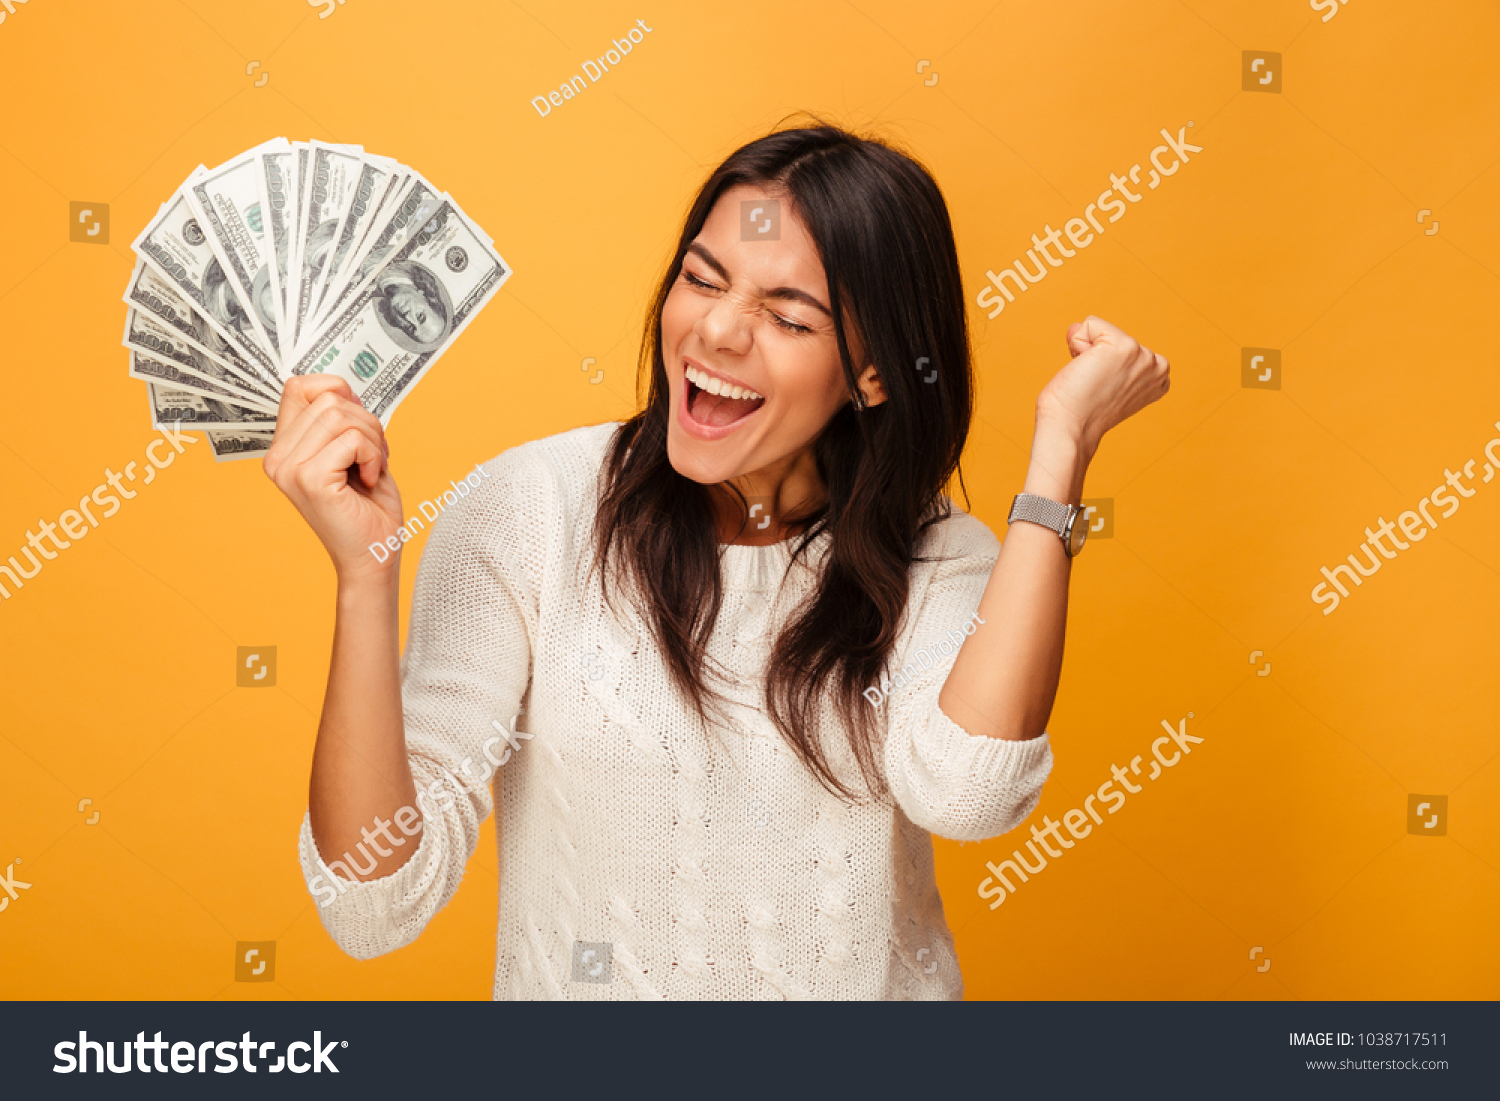 Portrait of a cheerful young woman holding money banknotes and celebrating isolated over yellow background #1038717511